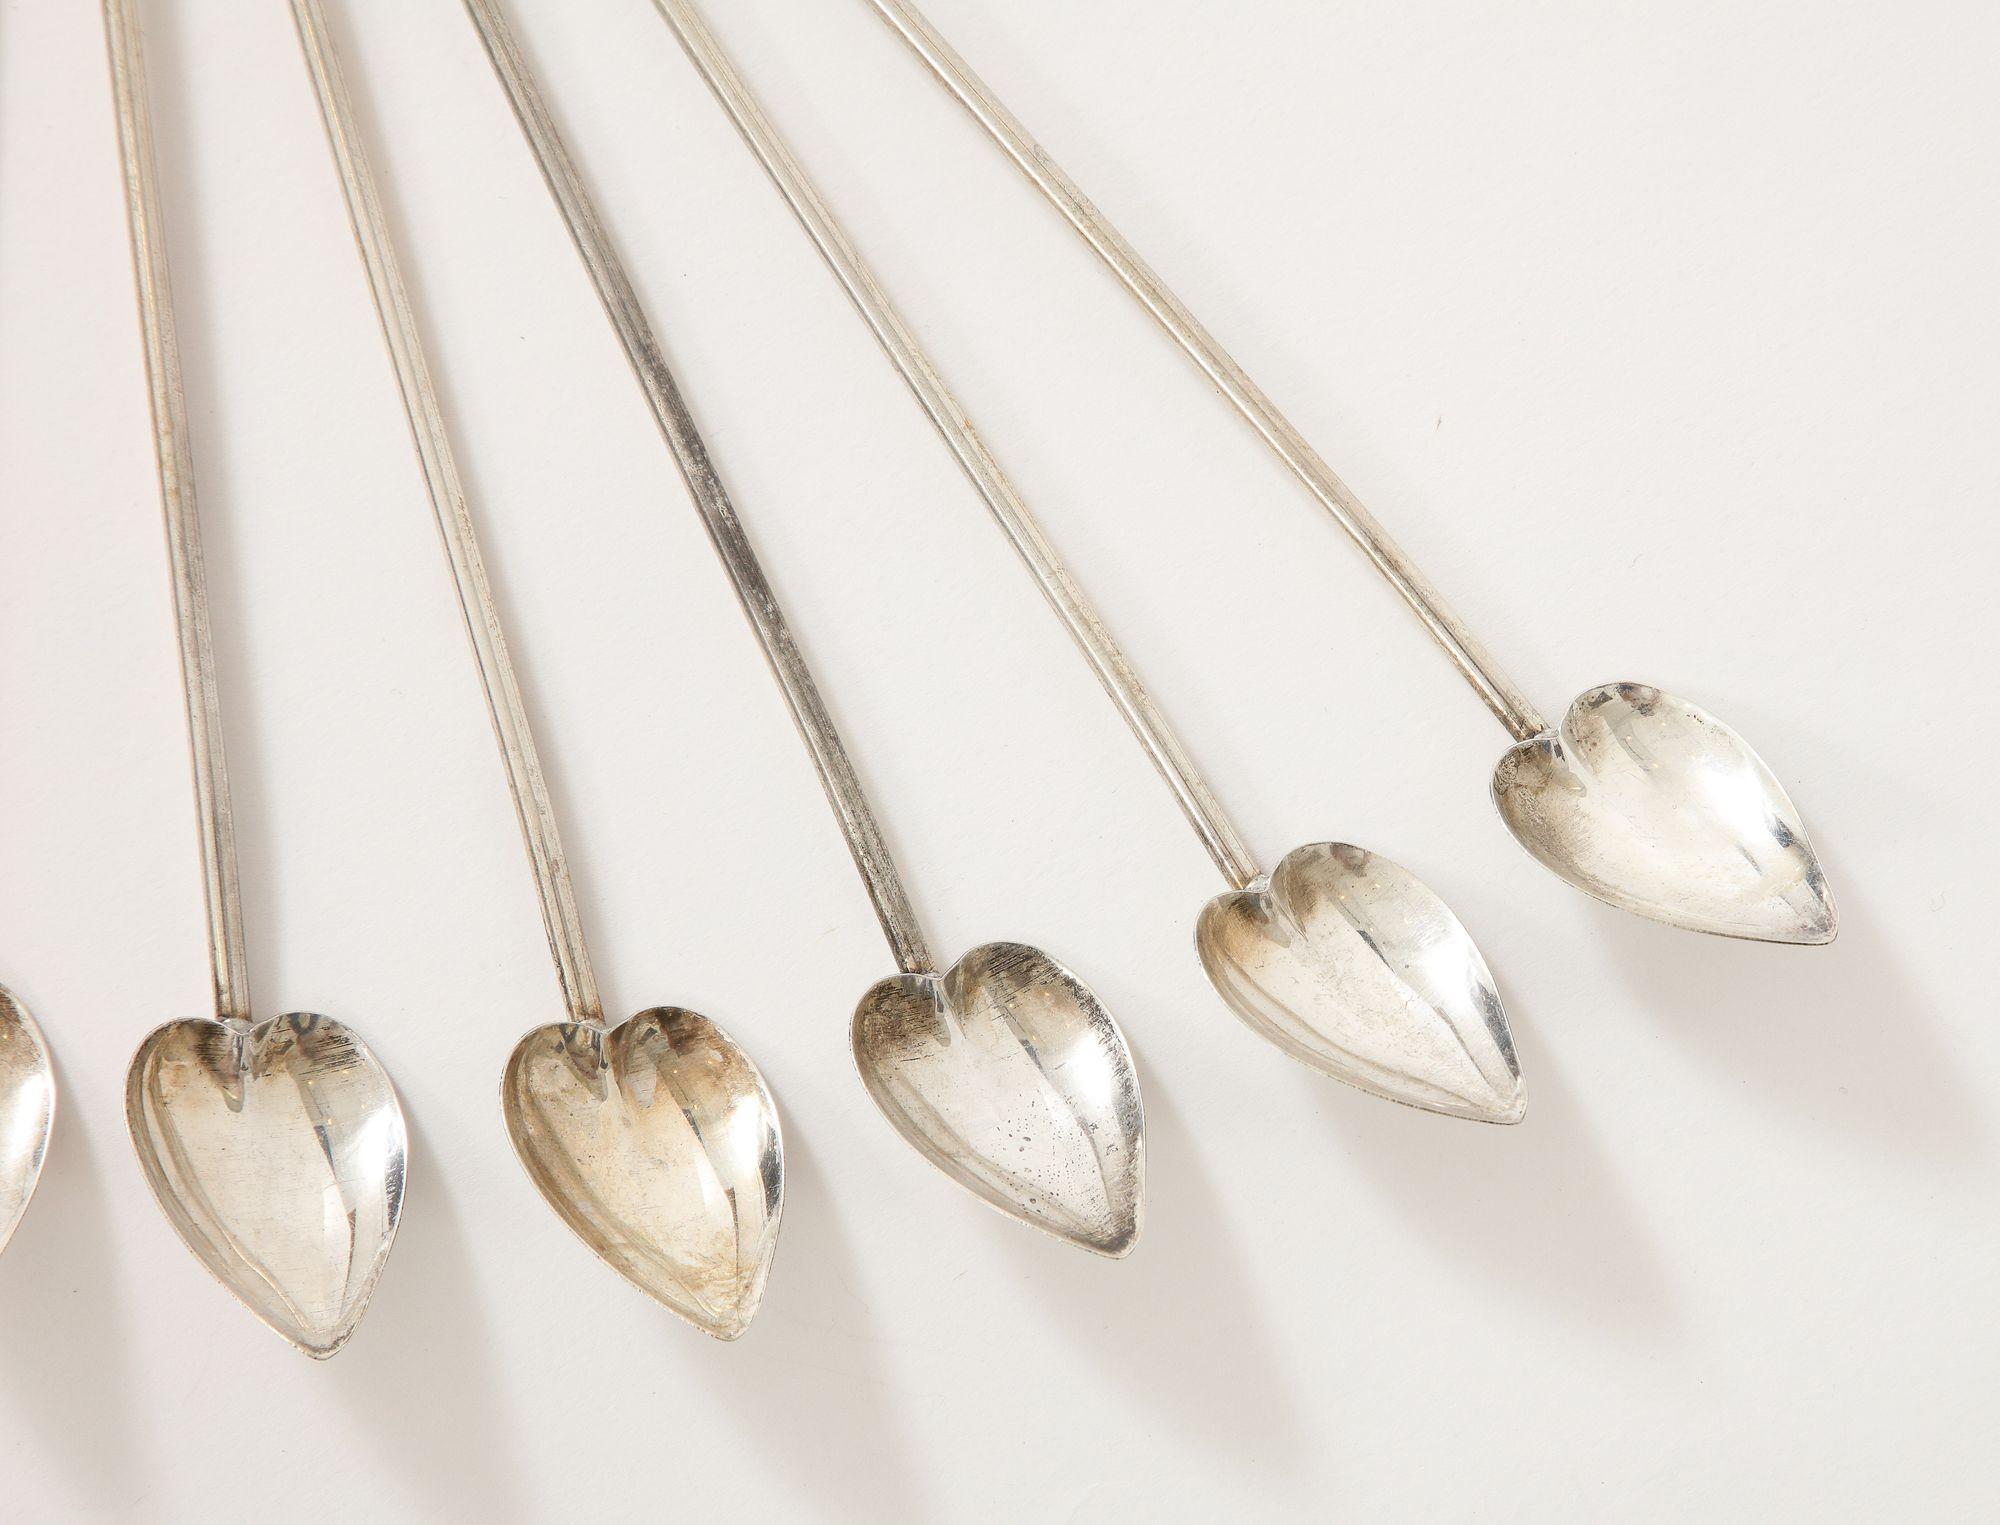 A set of 8 practical sterling silver heart shaped cocktail spoons/straws. These stirrers are a great complement to any cocktail party.